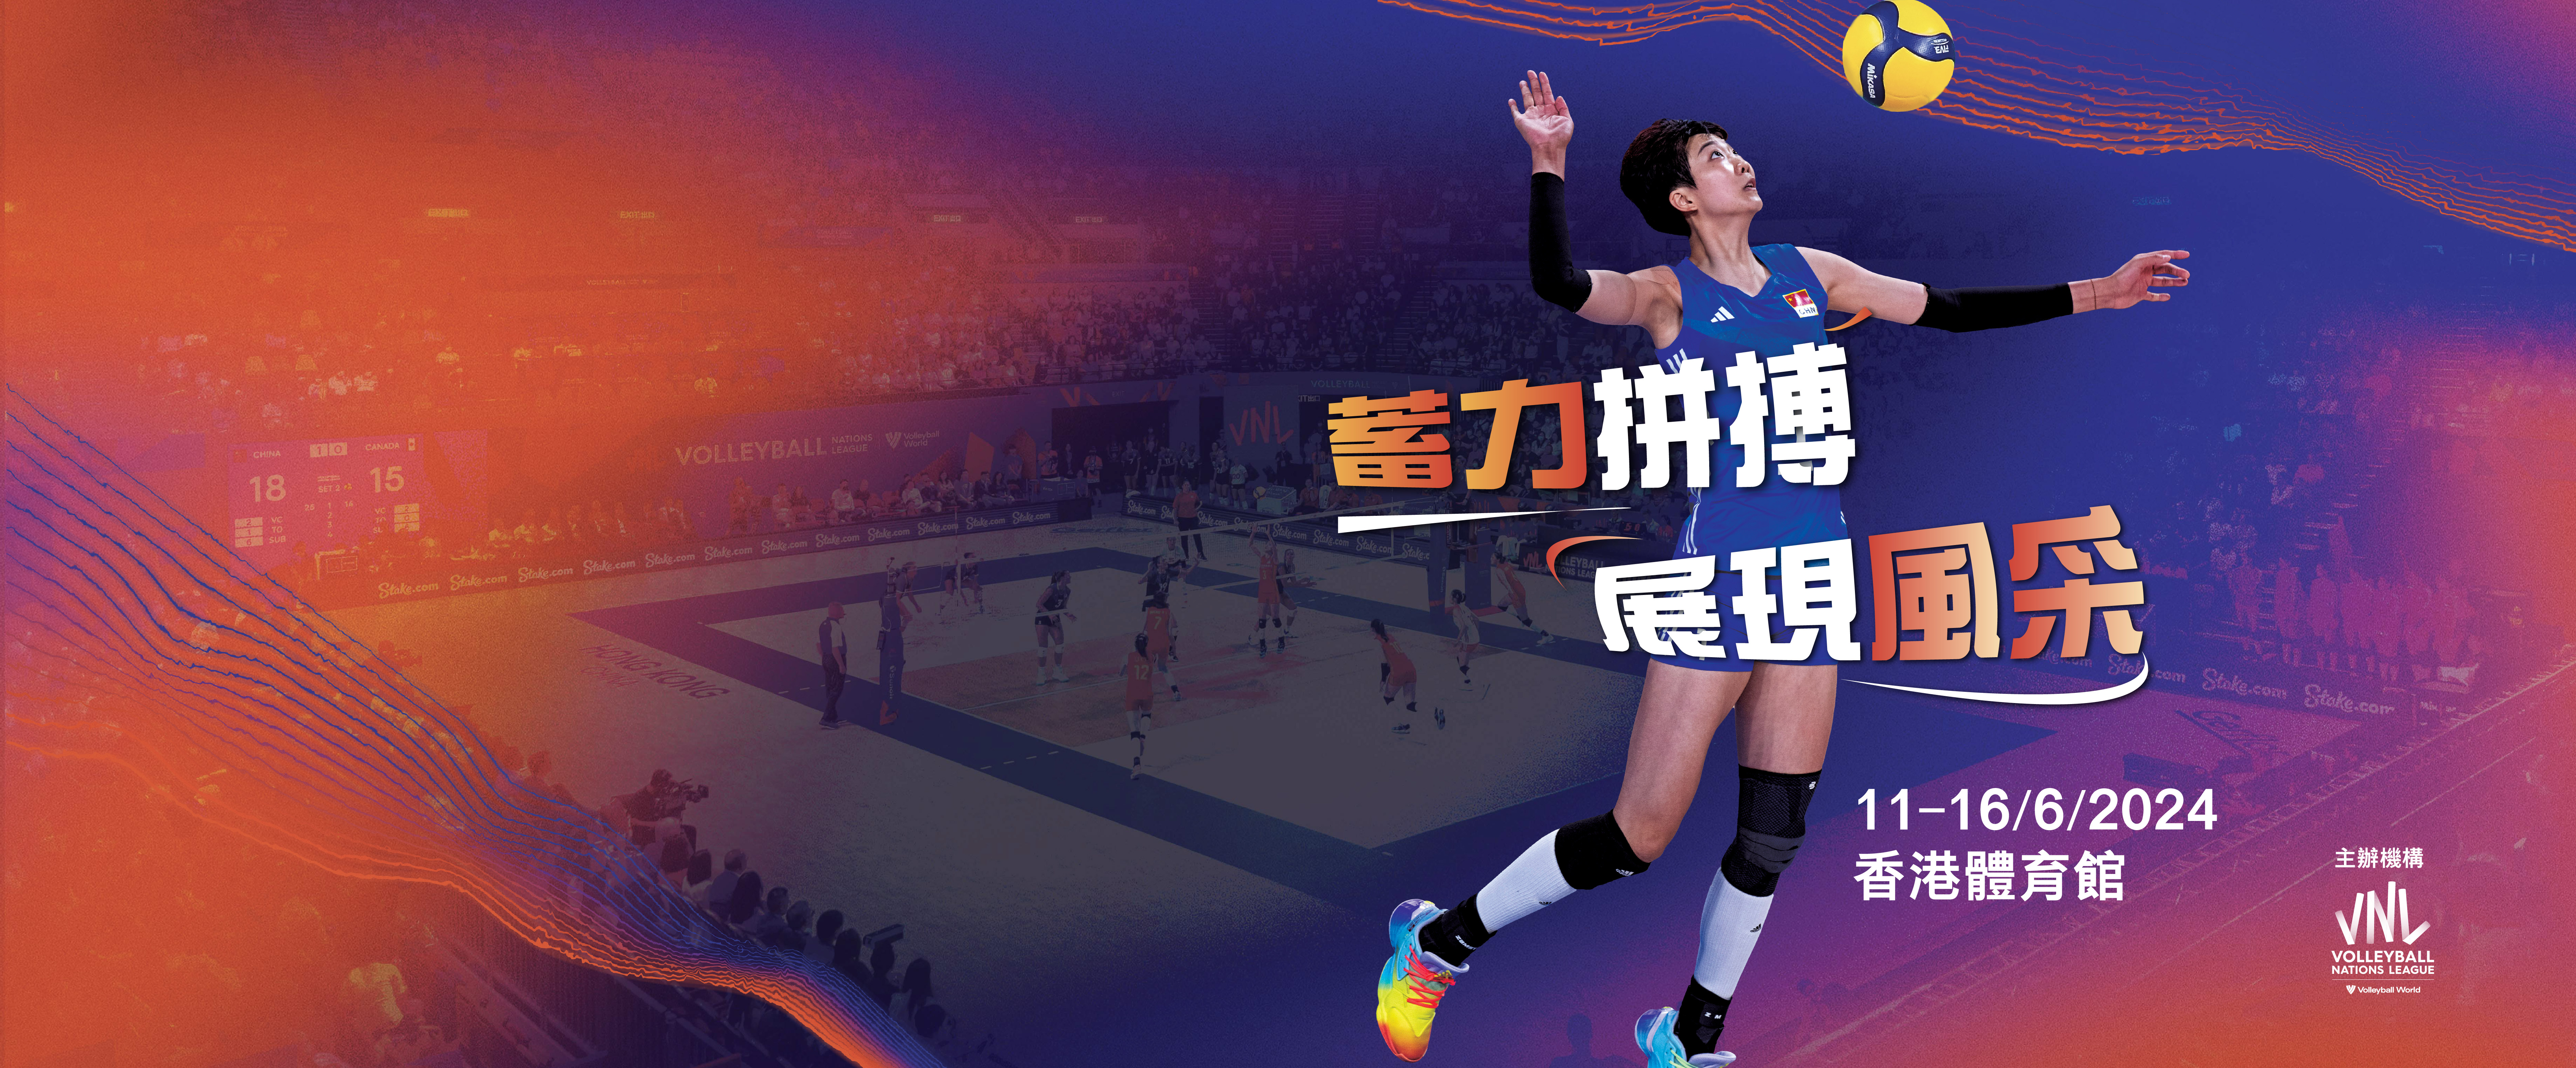 Volleyball Nations League Hong Kong 2024 
presented by China Life (Overseas)Don’t miss out the opportunityto be part of it!